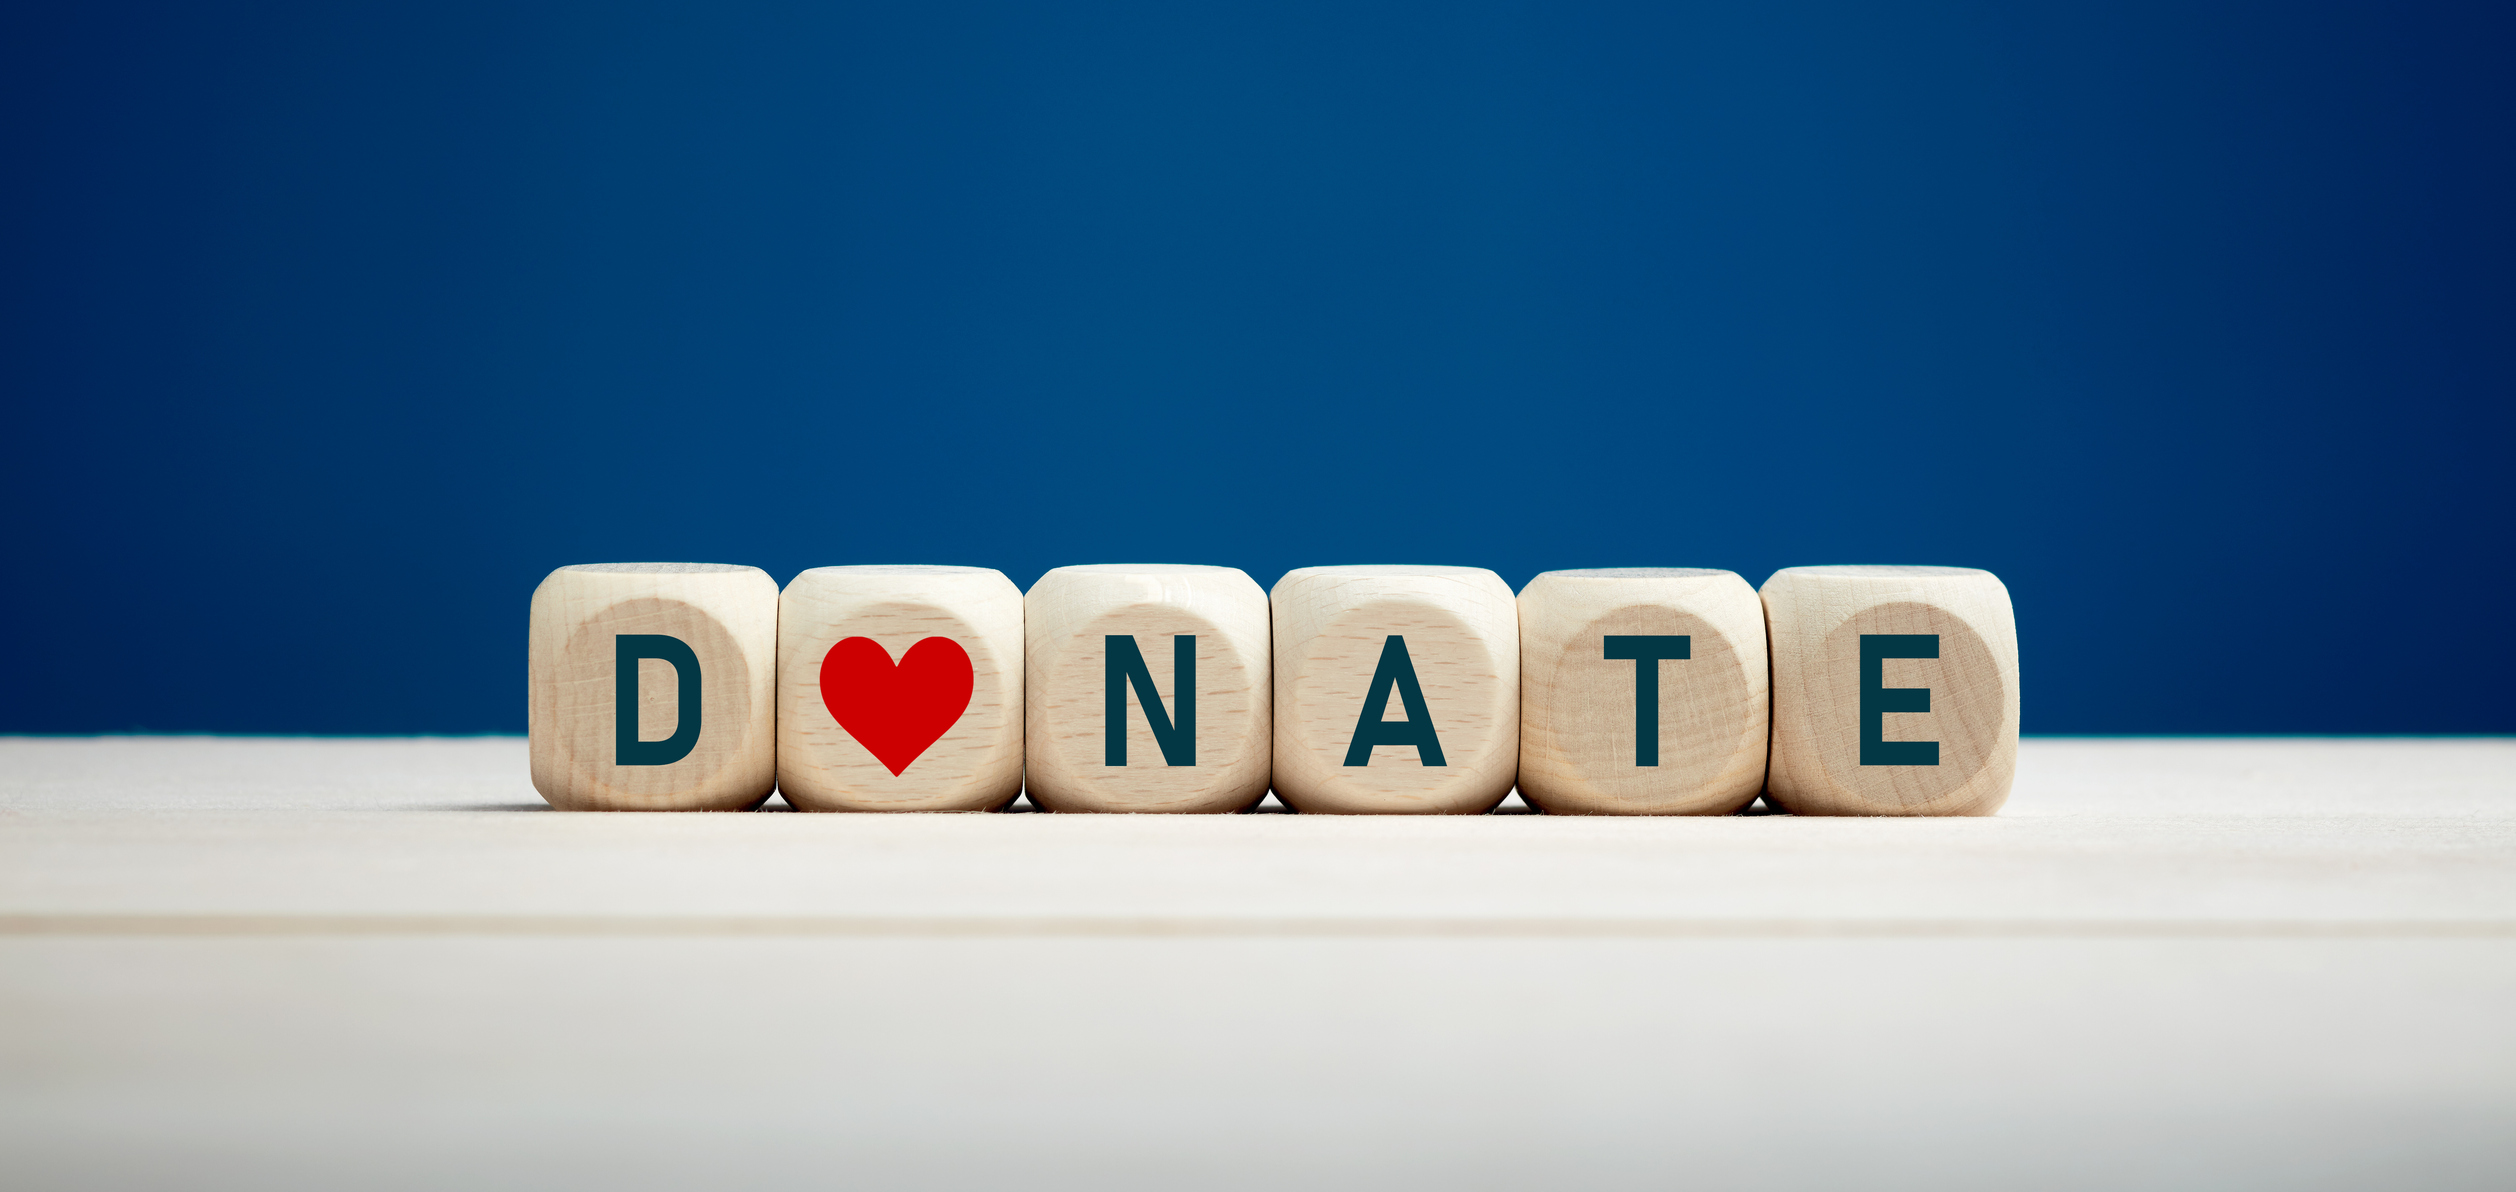 The word donate on wooden blocks with heart icon against blue background.